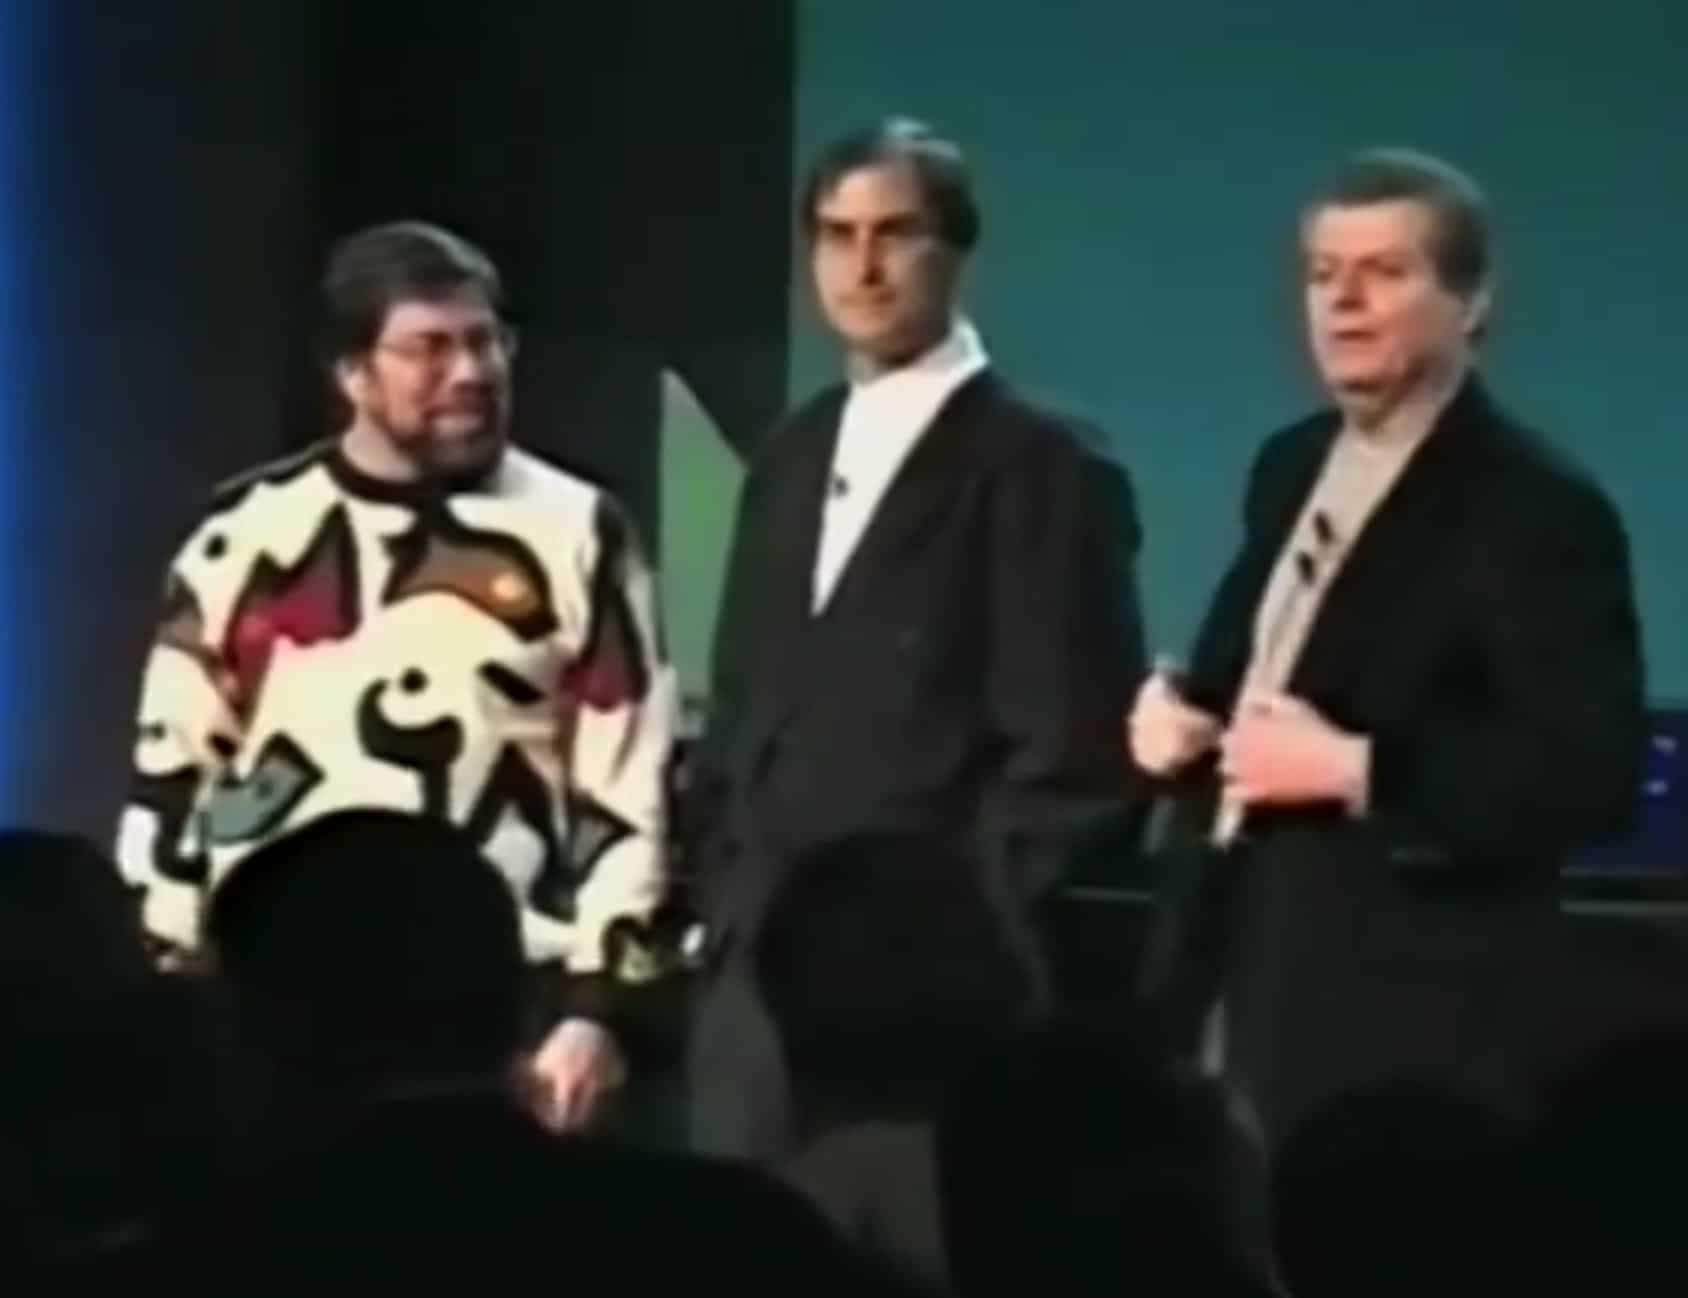 Today in Apple history: Woz and Jobs reunite onstage